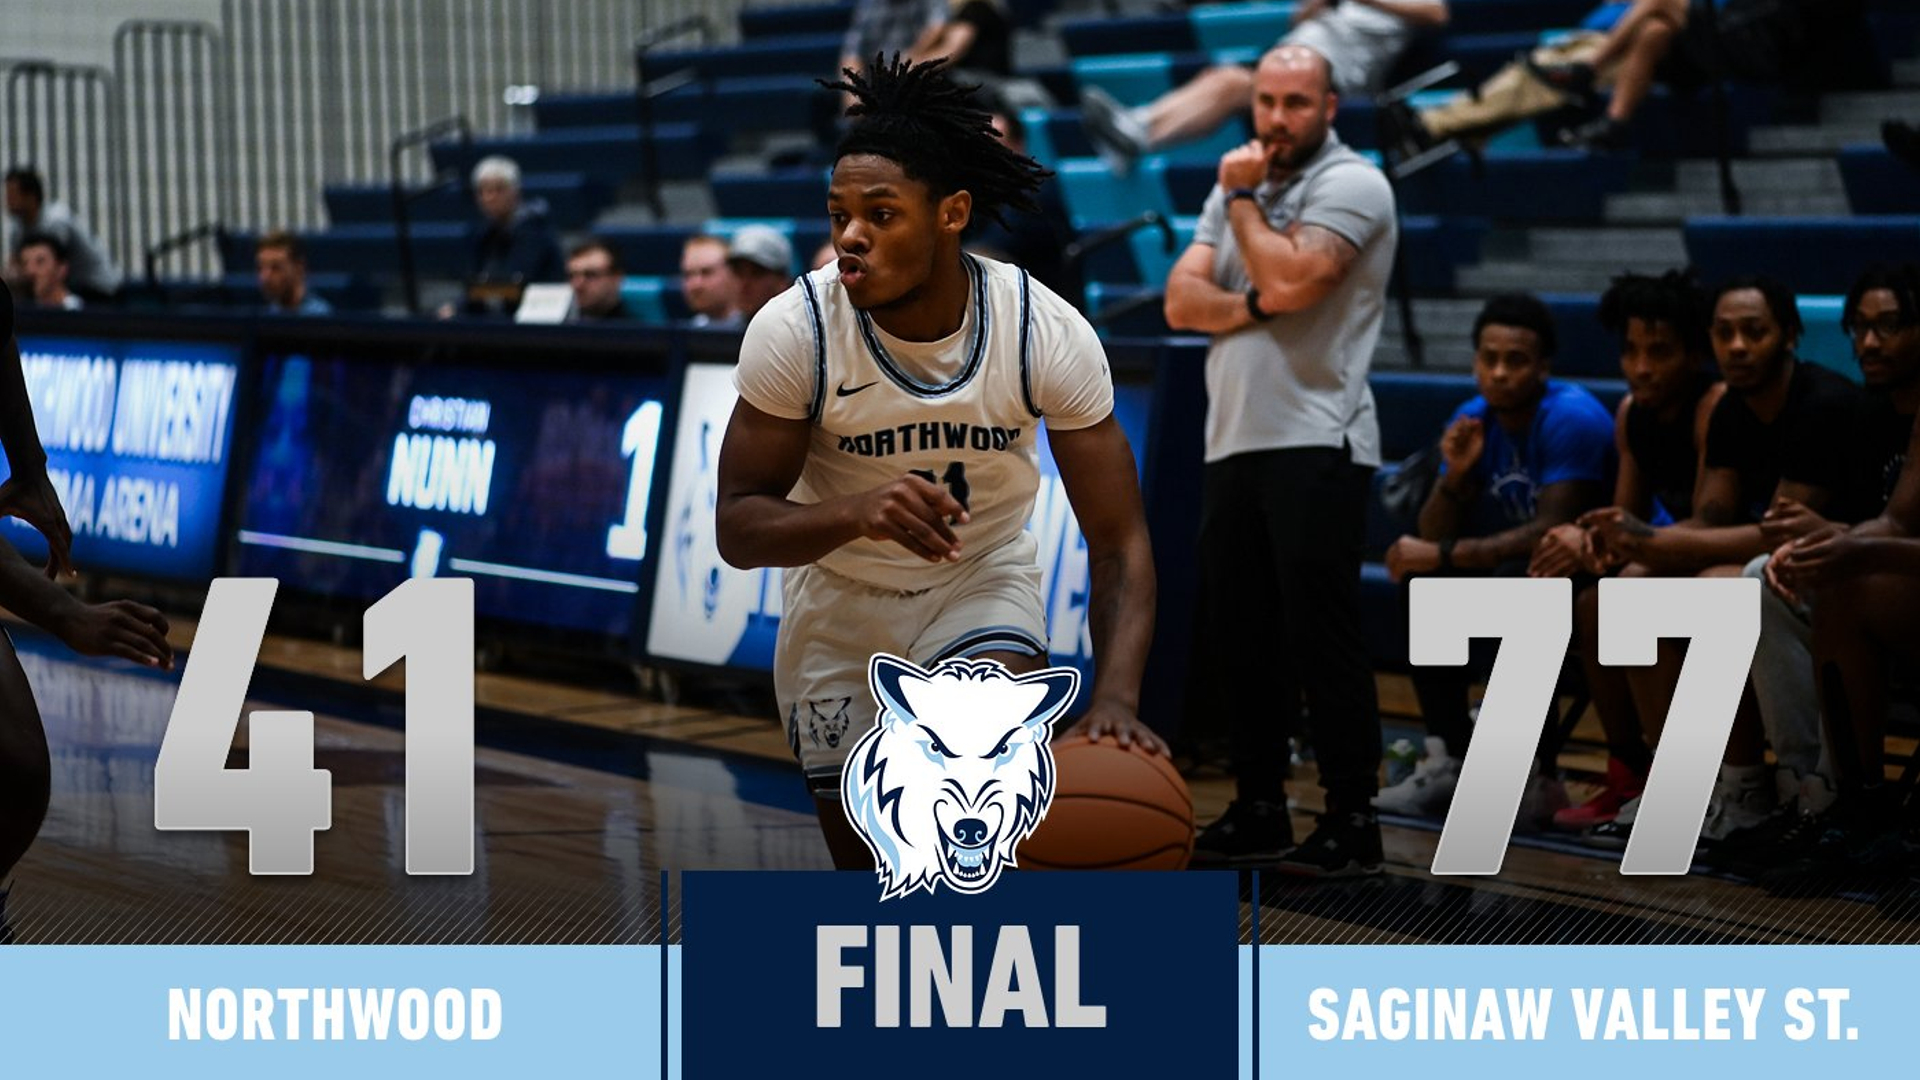 Men's Basketball Loses To Saginaw Valley 77-41